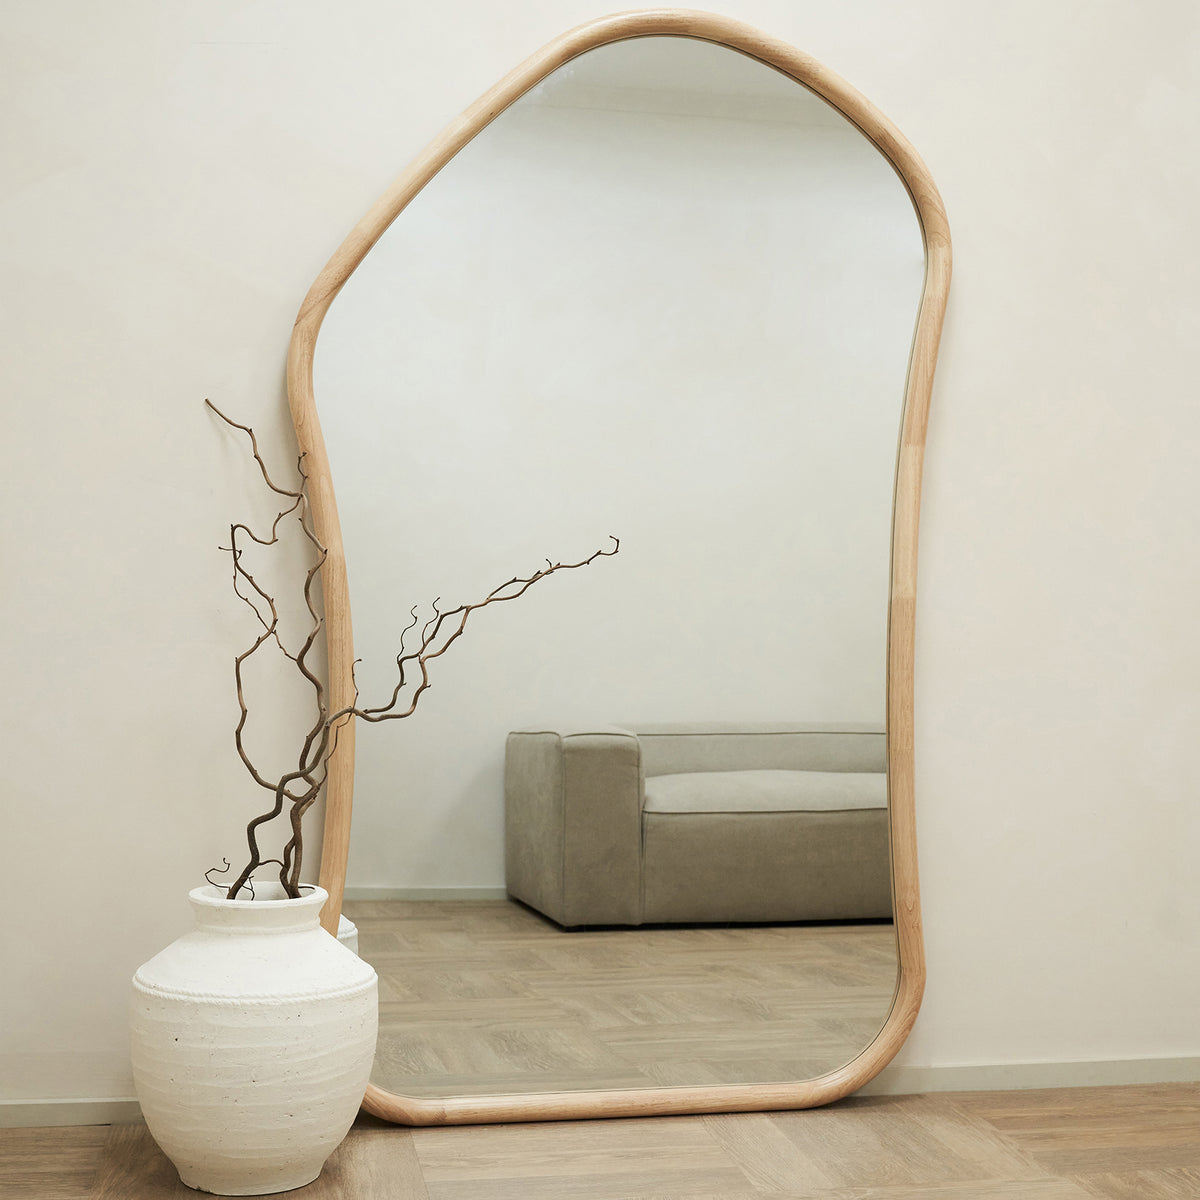 Extra Large Full Length Natural Organic Irregular Wooden Mirror leaning against wall